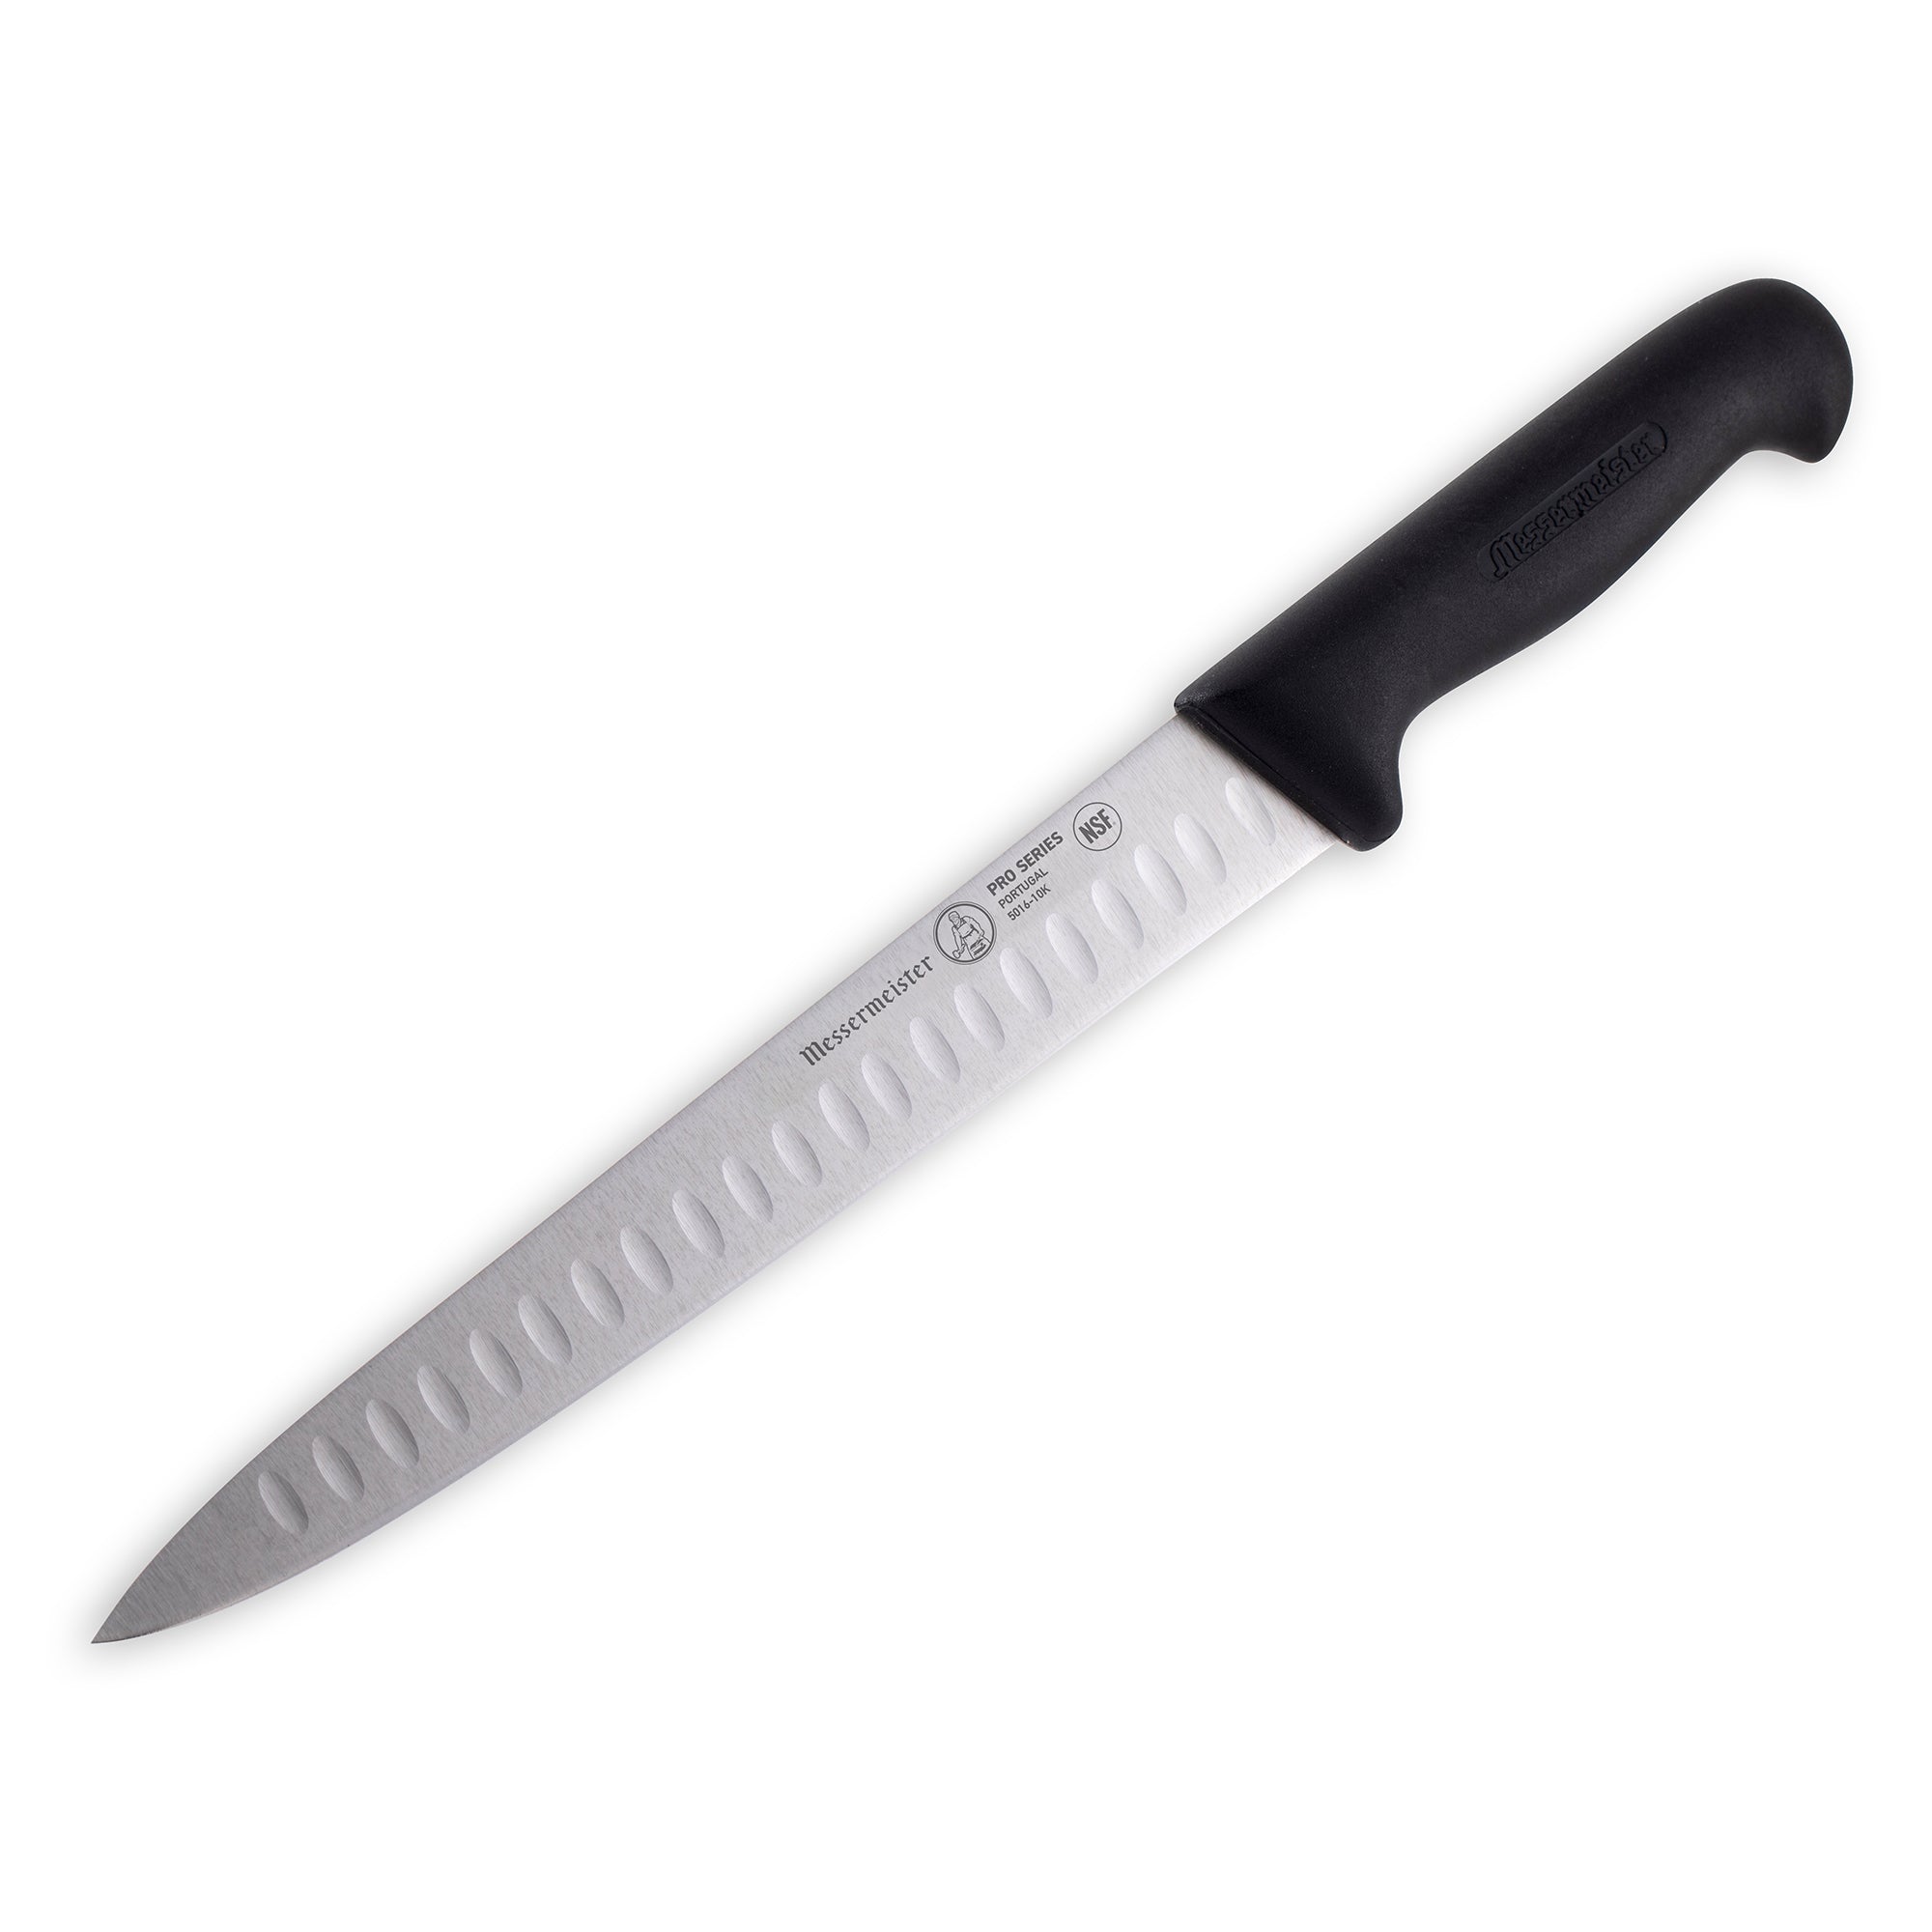 Pro Series Kullens Carving Knife - 8 Inch